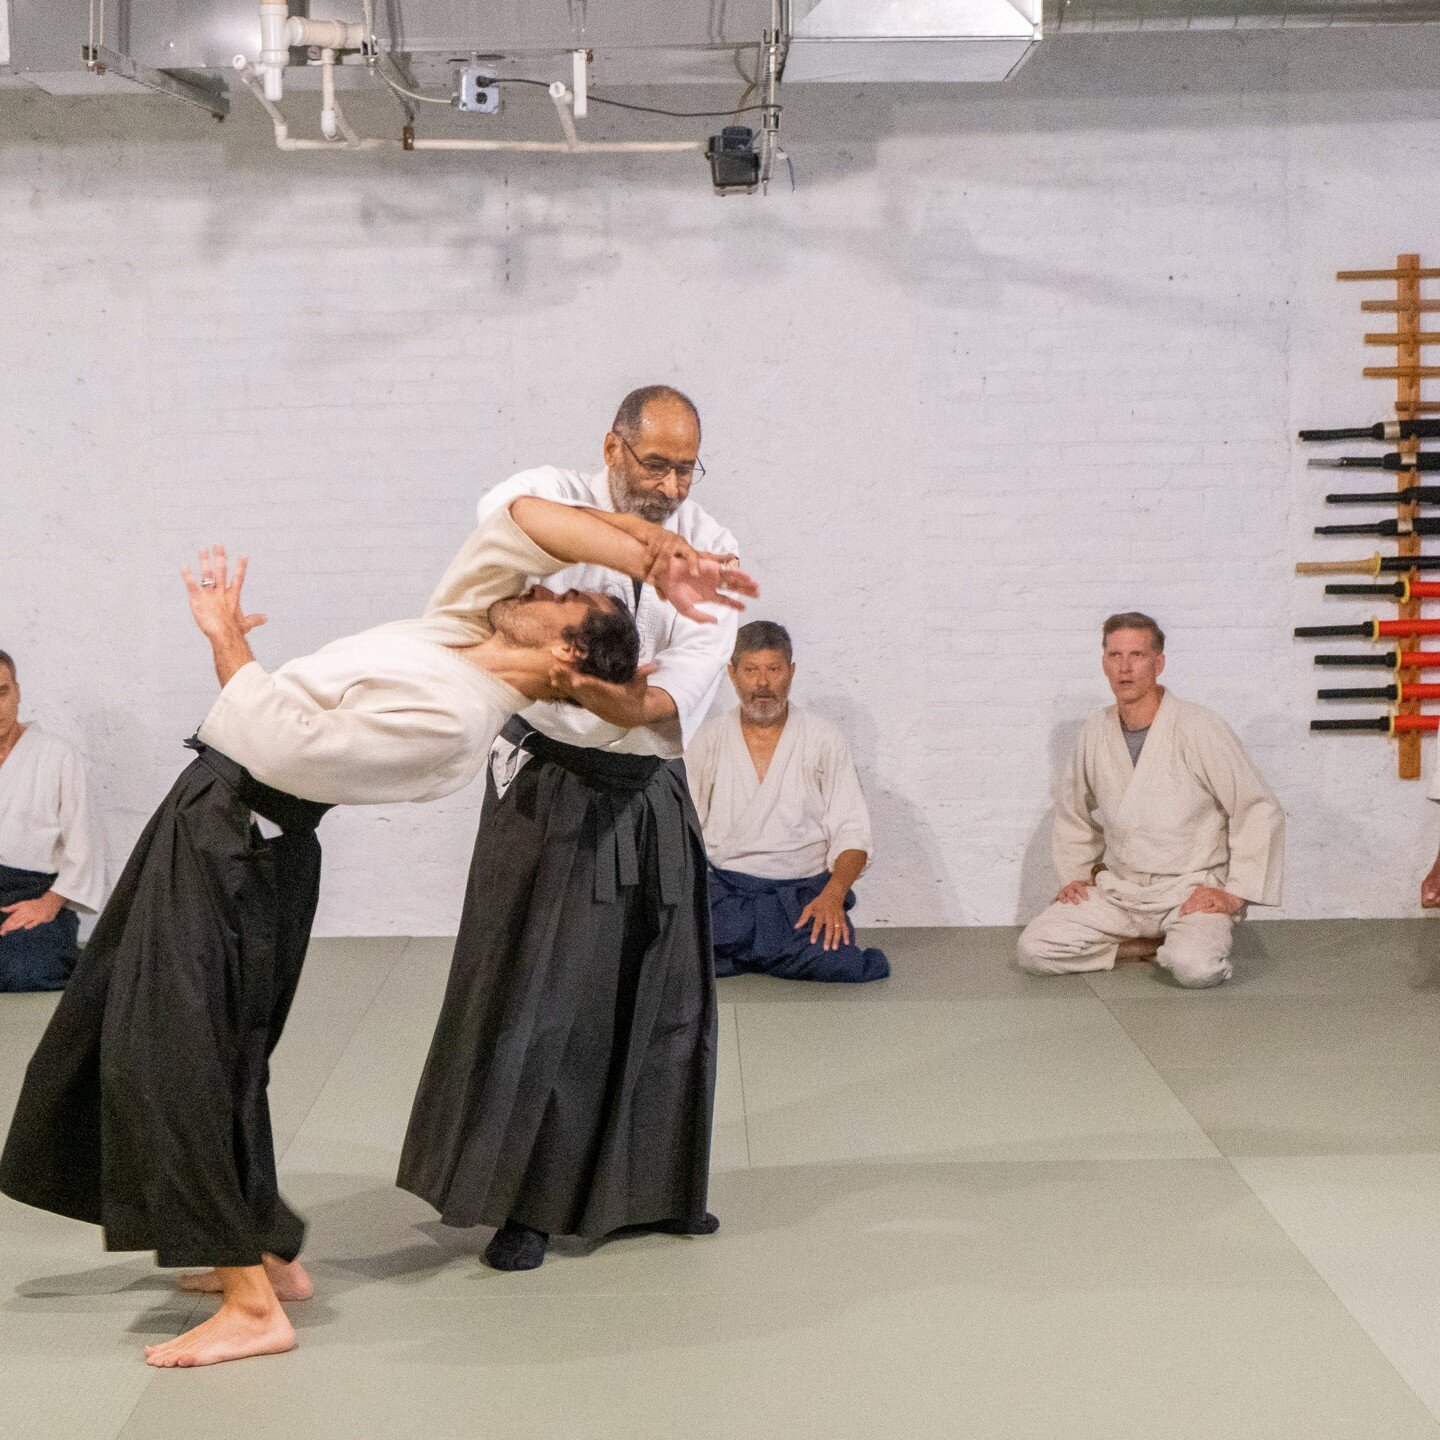 Nizam Sensei will be visiting/ teaching at the Aikikai of Philadelphia on Saturday, October 8th, from 11am &ndash; 1pm. 

Smith and Nizam Senseis worked together for the past 25-plus years to create the foundation for the Aikikai of Philadelphia.

Pl